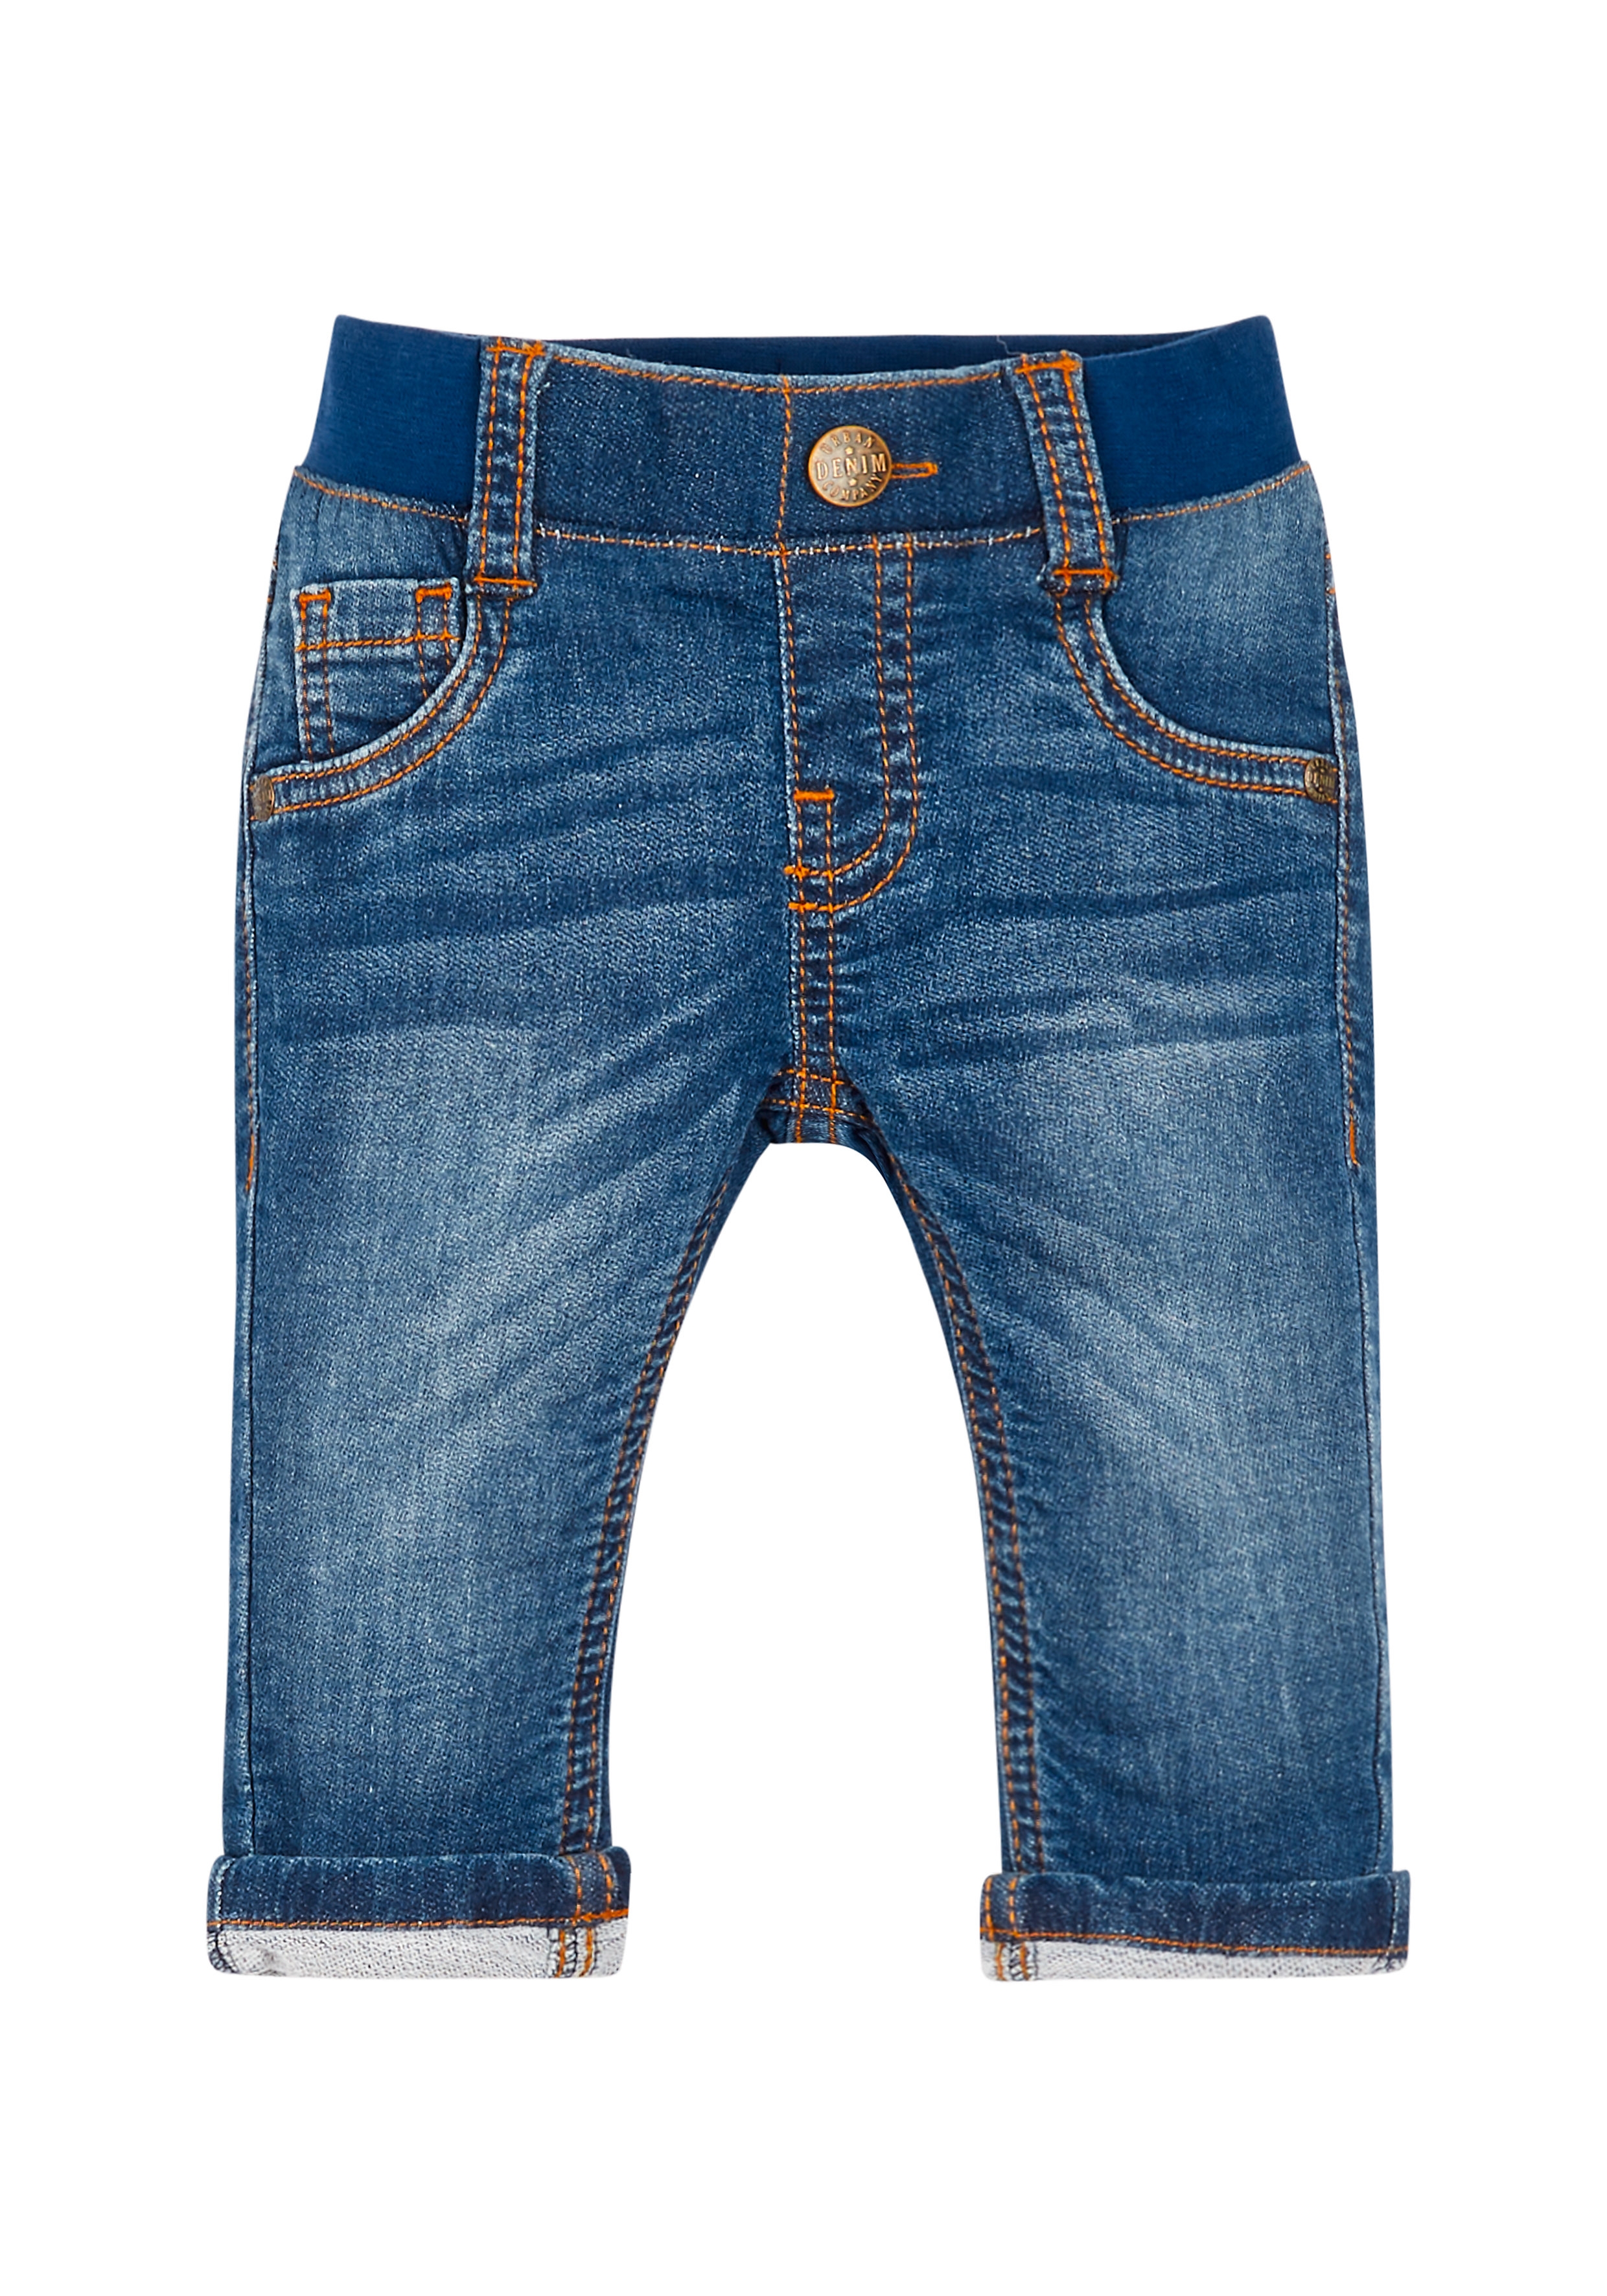 Mothercare | Boys My First Joggers Jeans - Denim